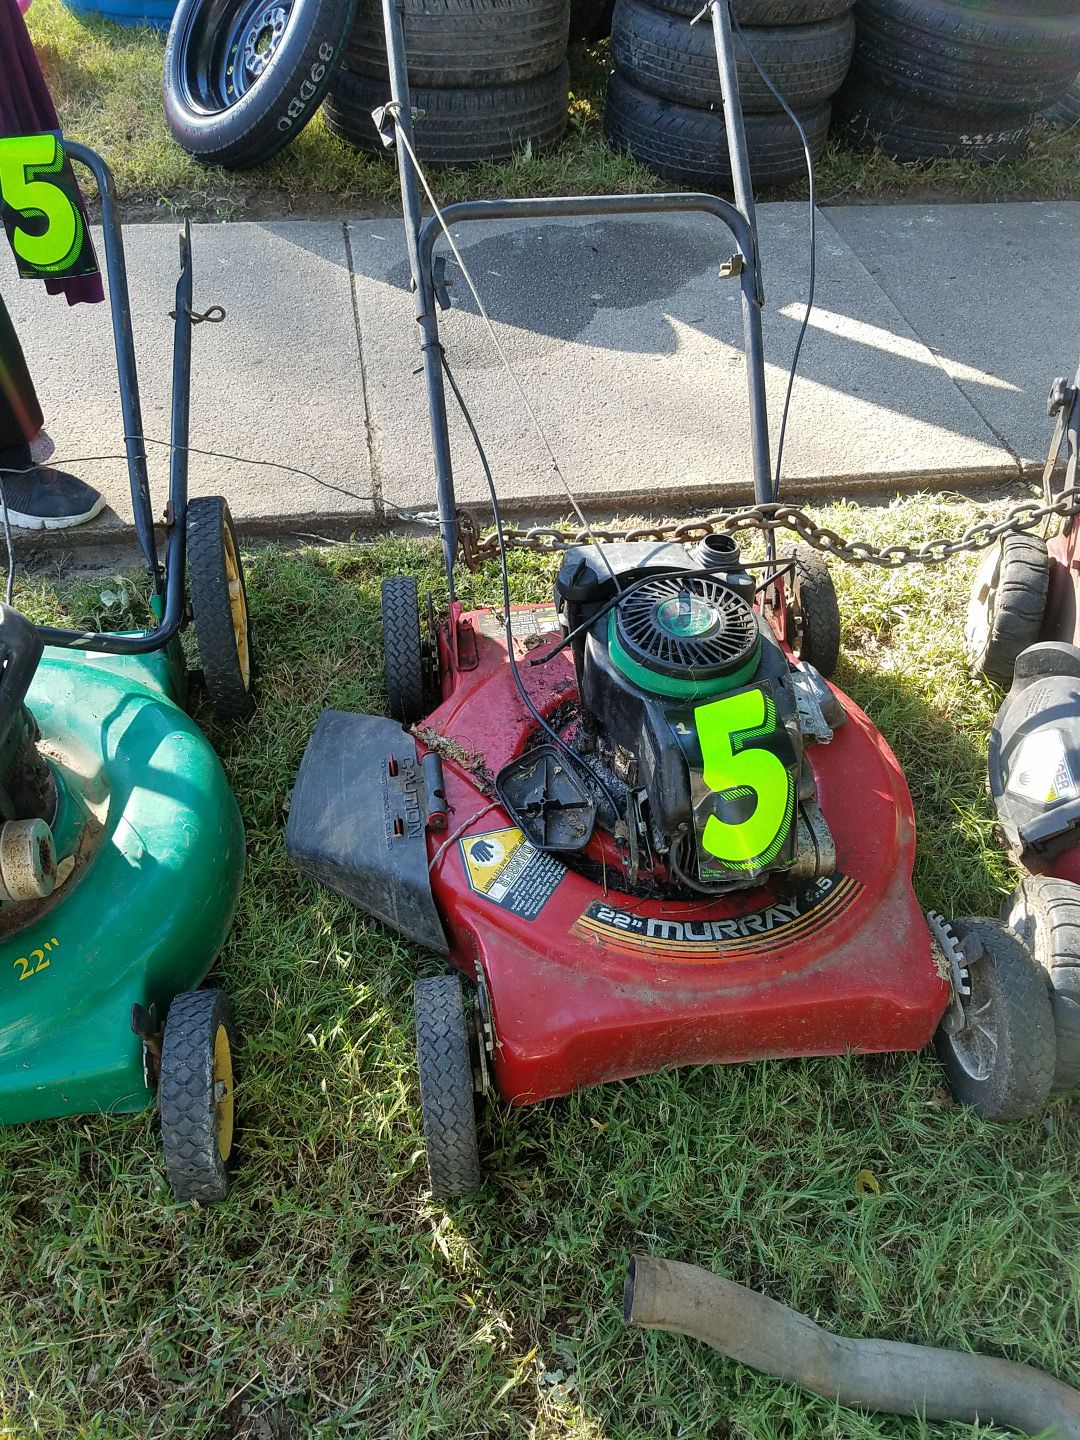 6 Mowers All for $100